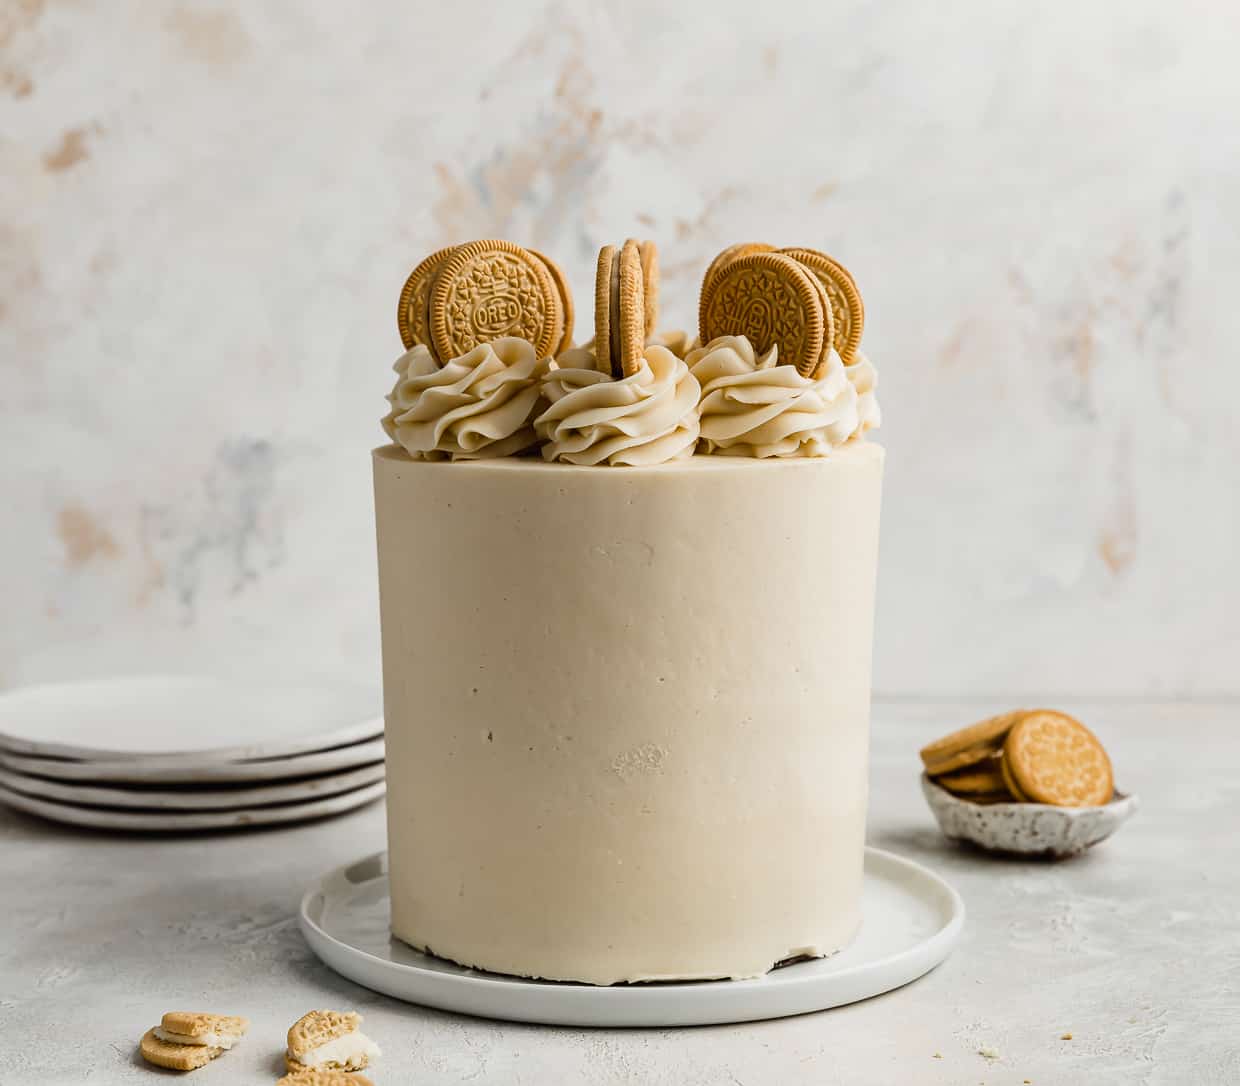 A Golden Oreo Cake against a white and cream textured background.